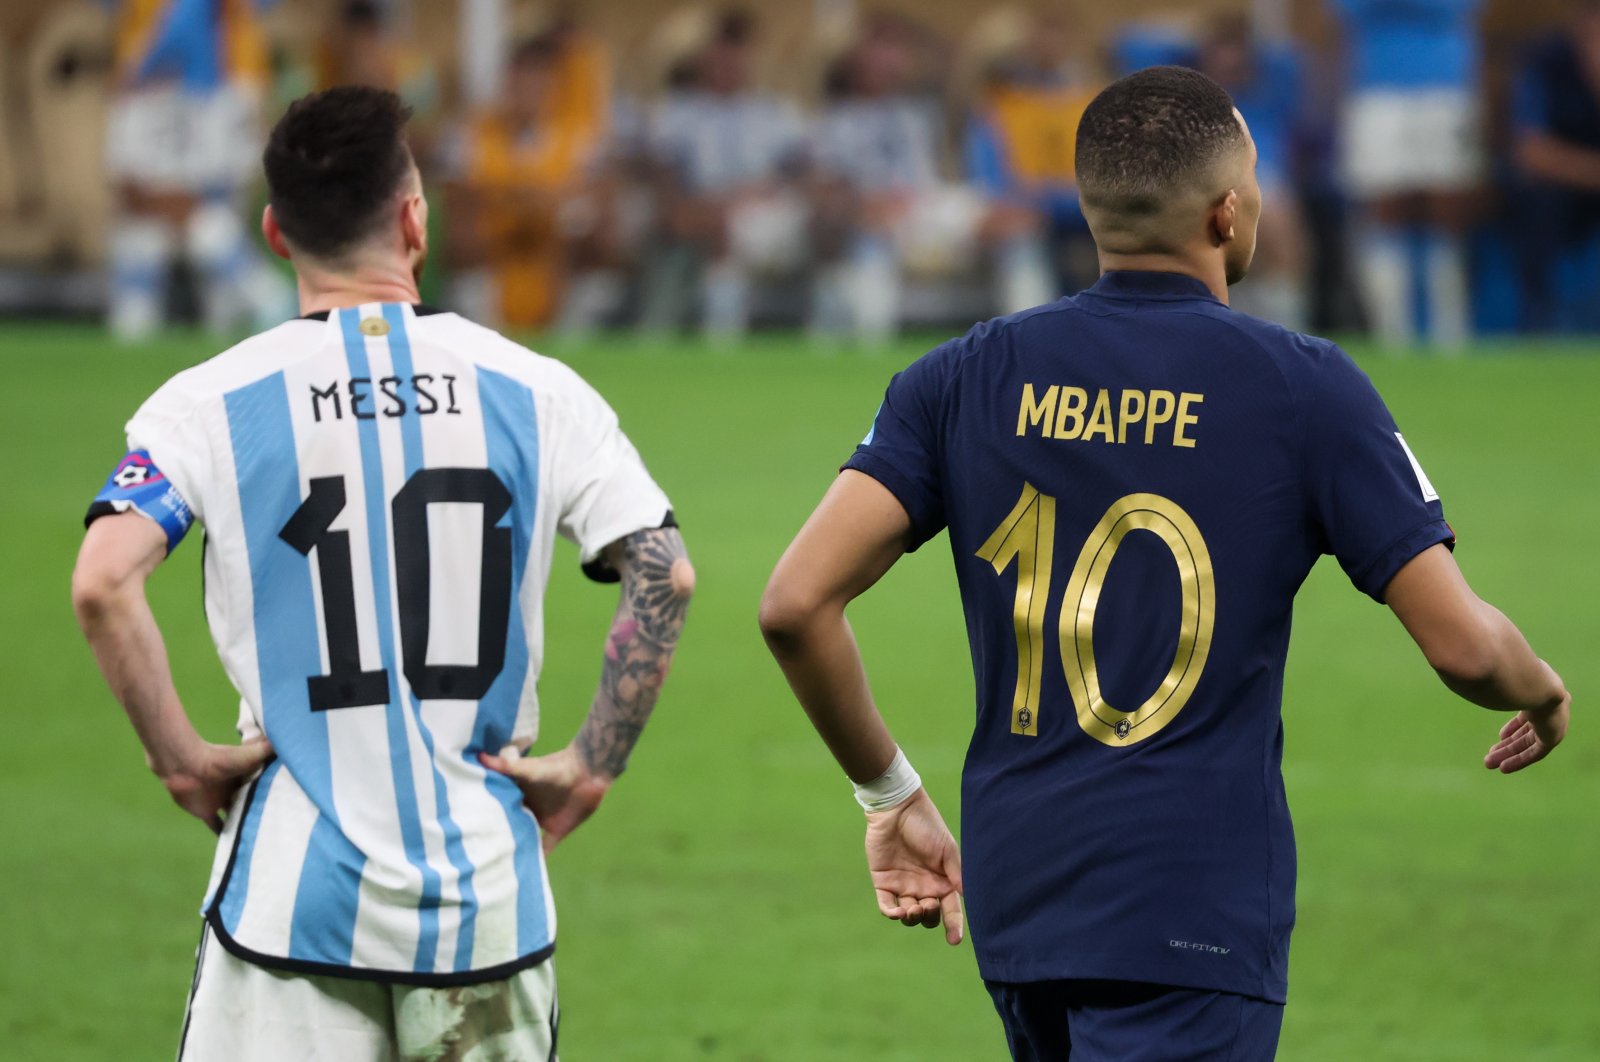 Lionel Messi (L) and Kylian Mbappe during the FIFA World Cup Qatar 2022 Final match, Lusail City, Qatar, Dec. 18, 2022. (Getty Images)